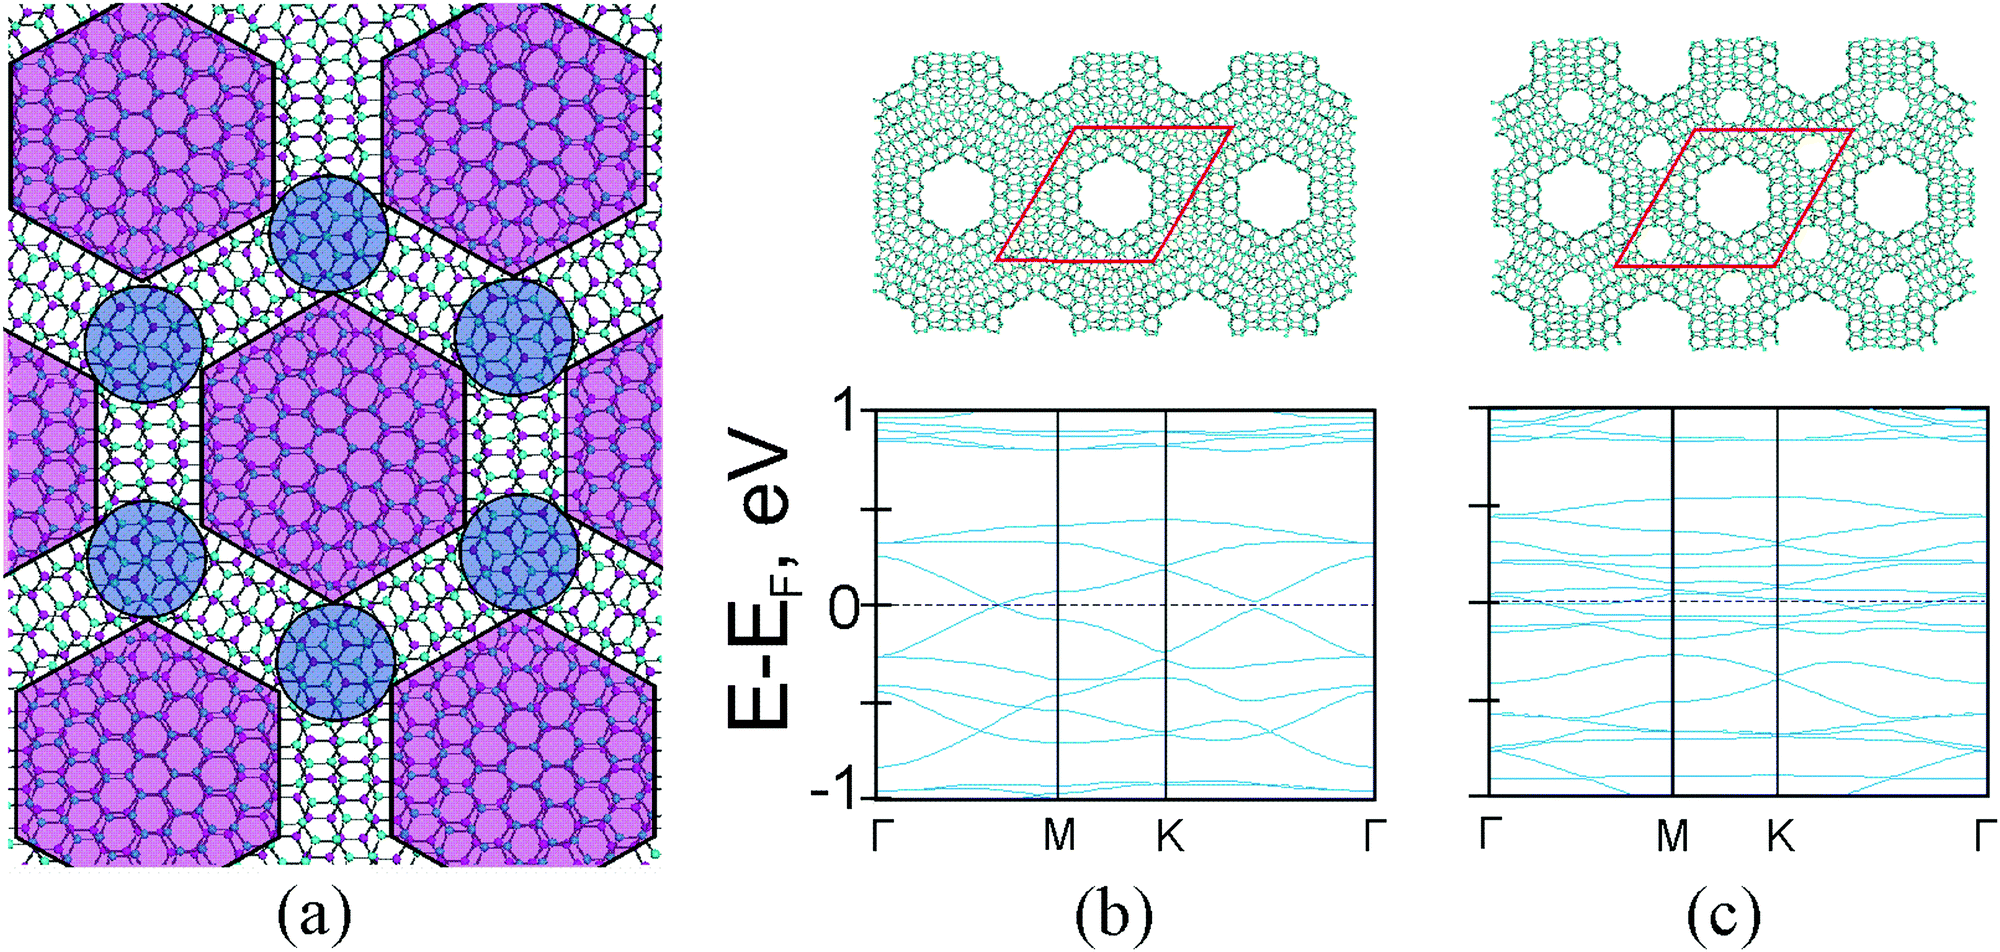 Bilayered graphene as a platform of nanostructures with folded 